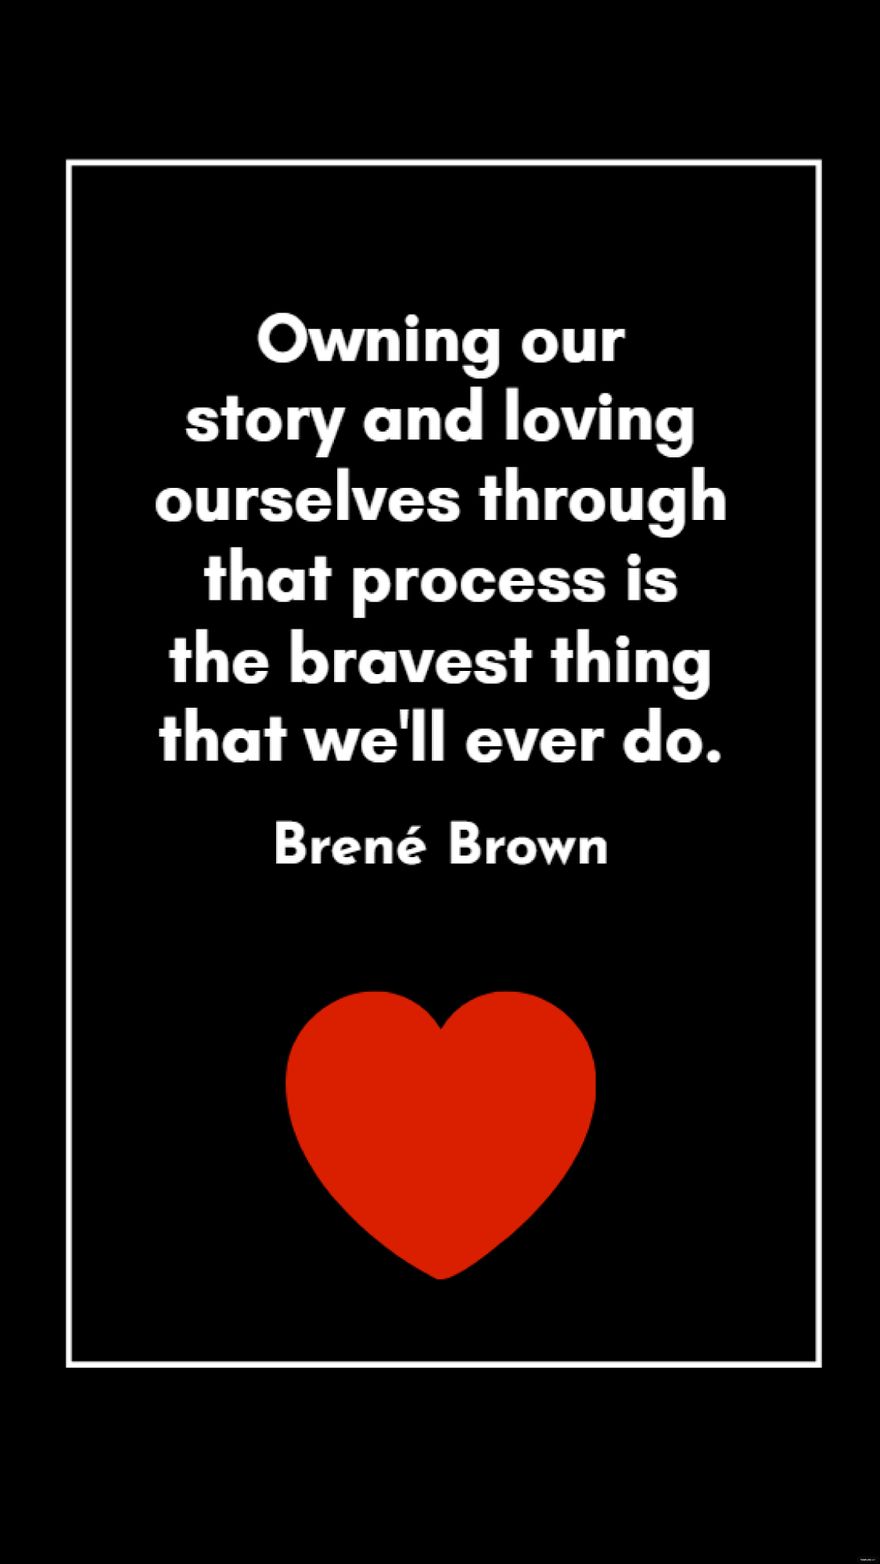 Brené Brown - Owning our story and loving ourselves through that process is the bravest thing that we'll ever do.